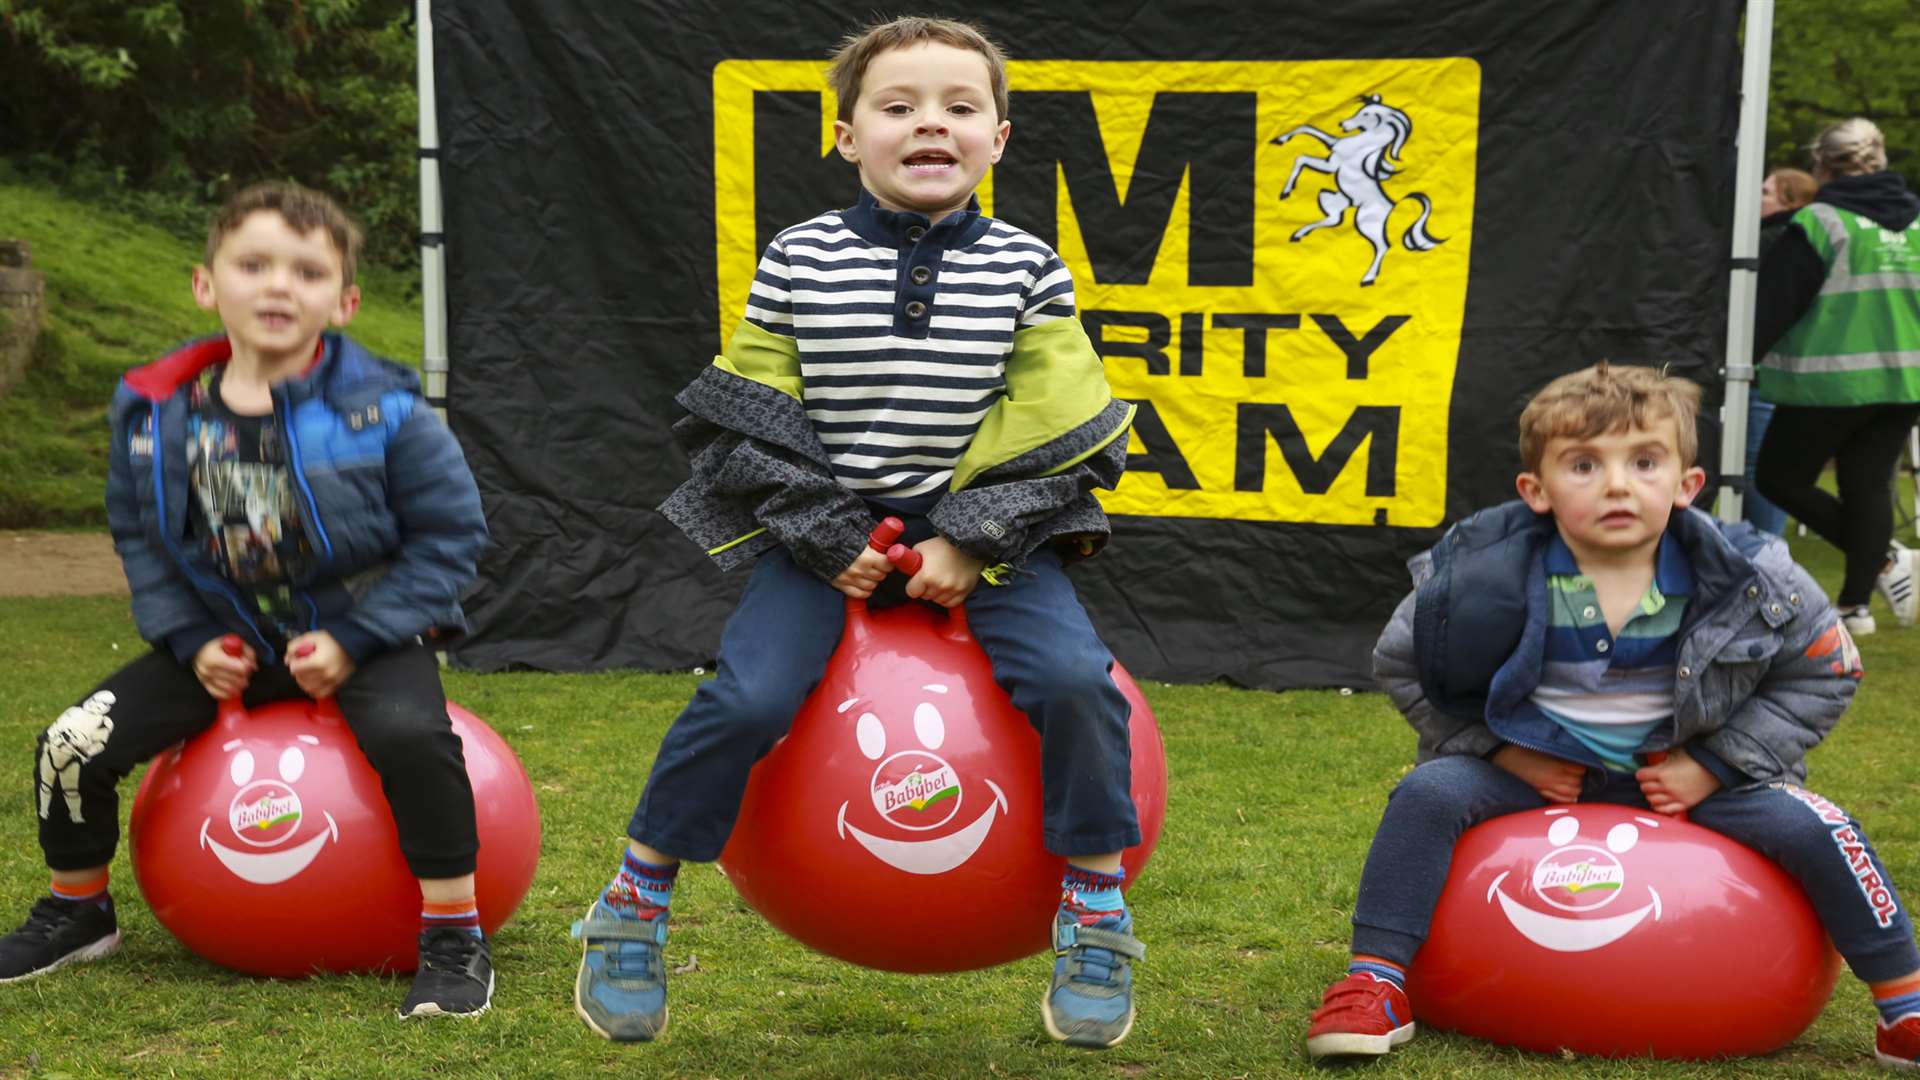 Space hopper racing is among the fun activities on offer at free mini-festival Buster's Big Bash.